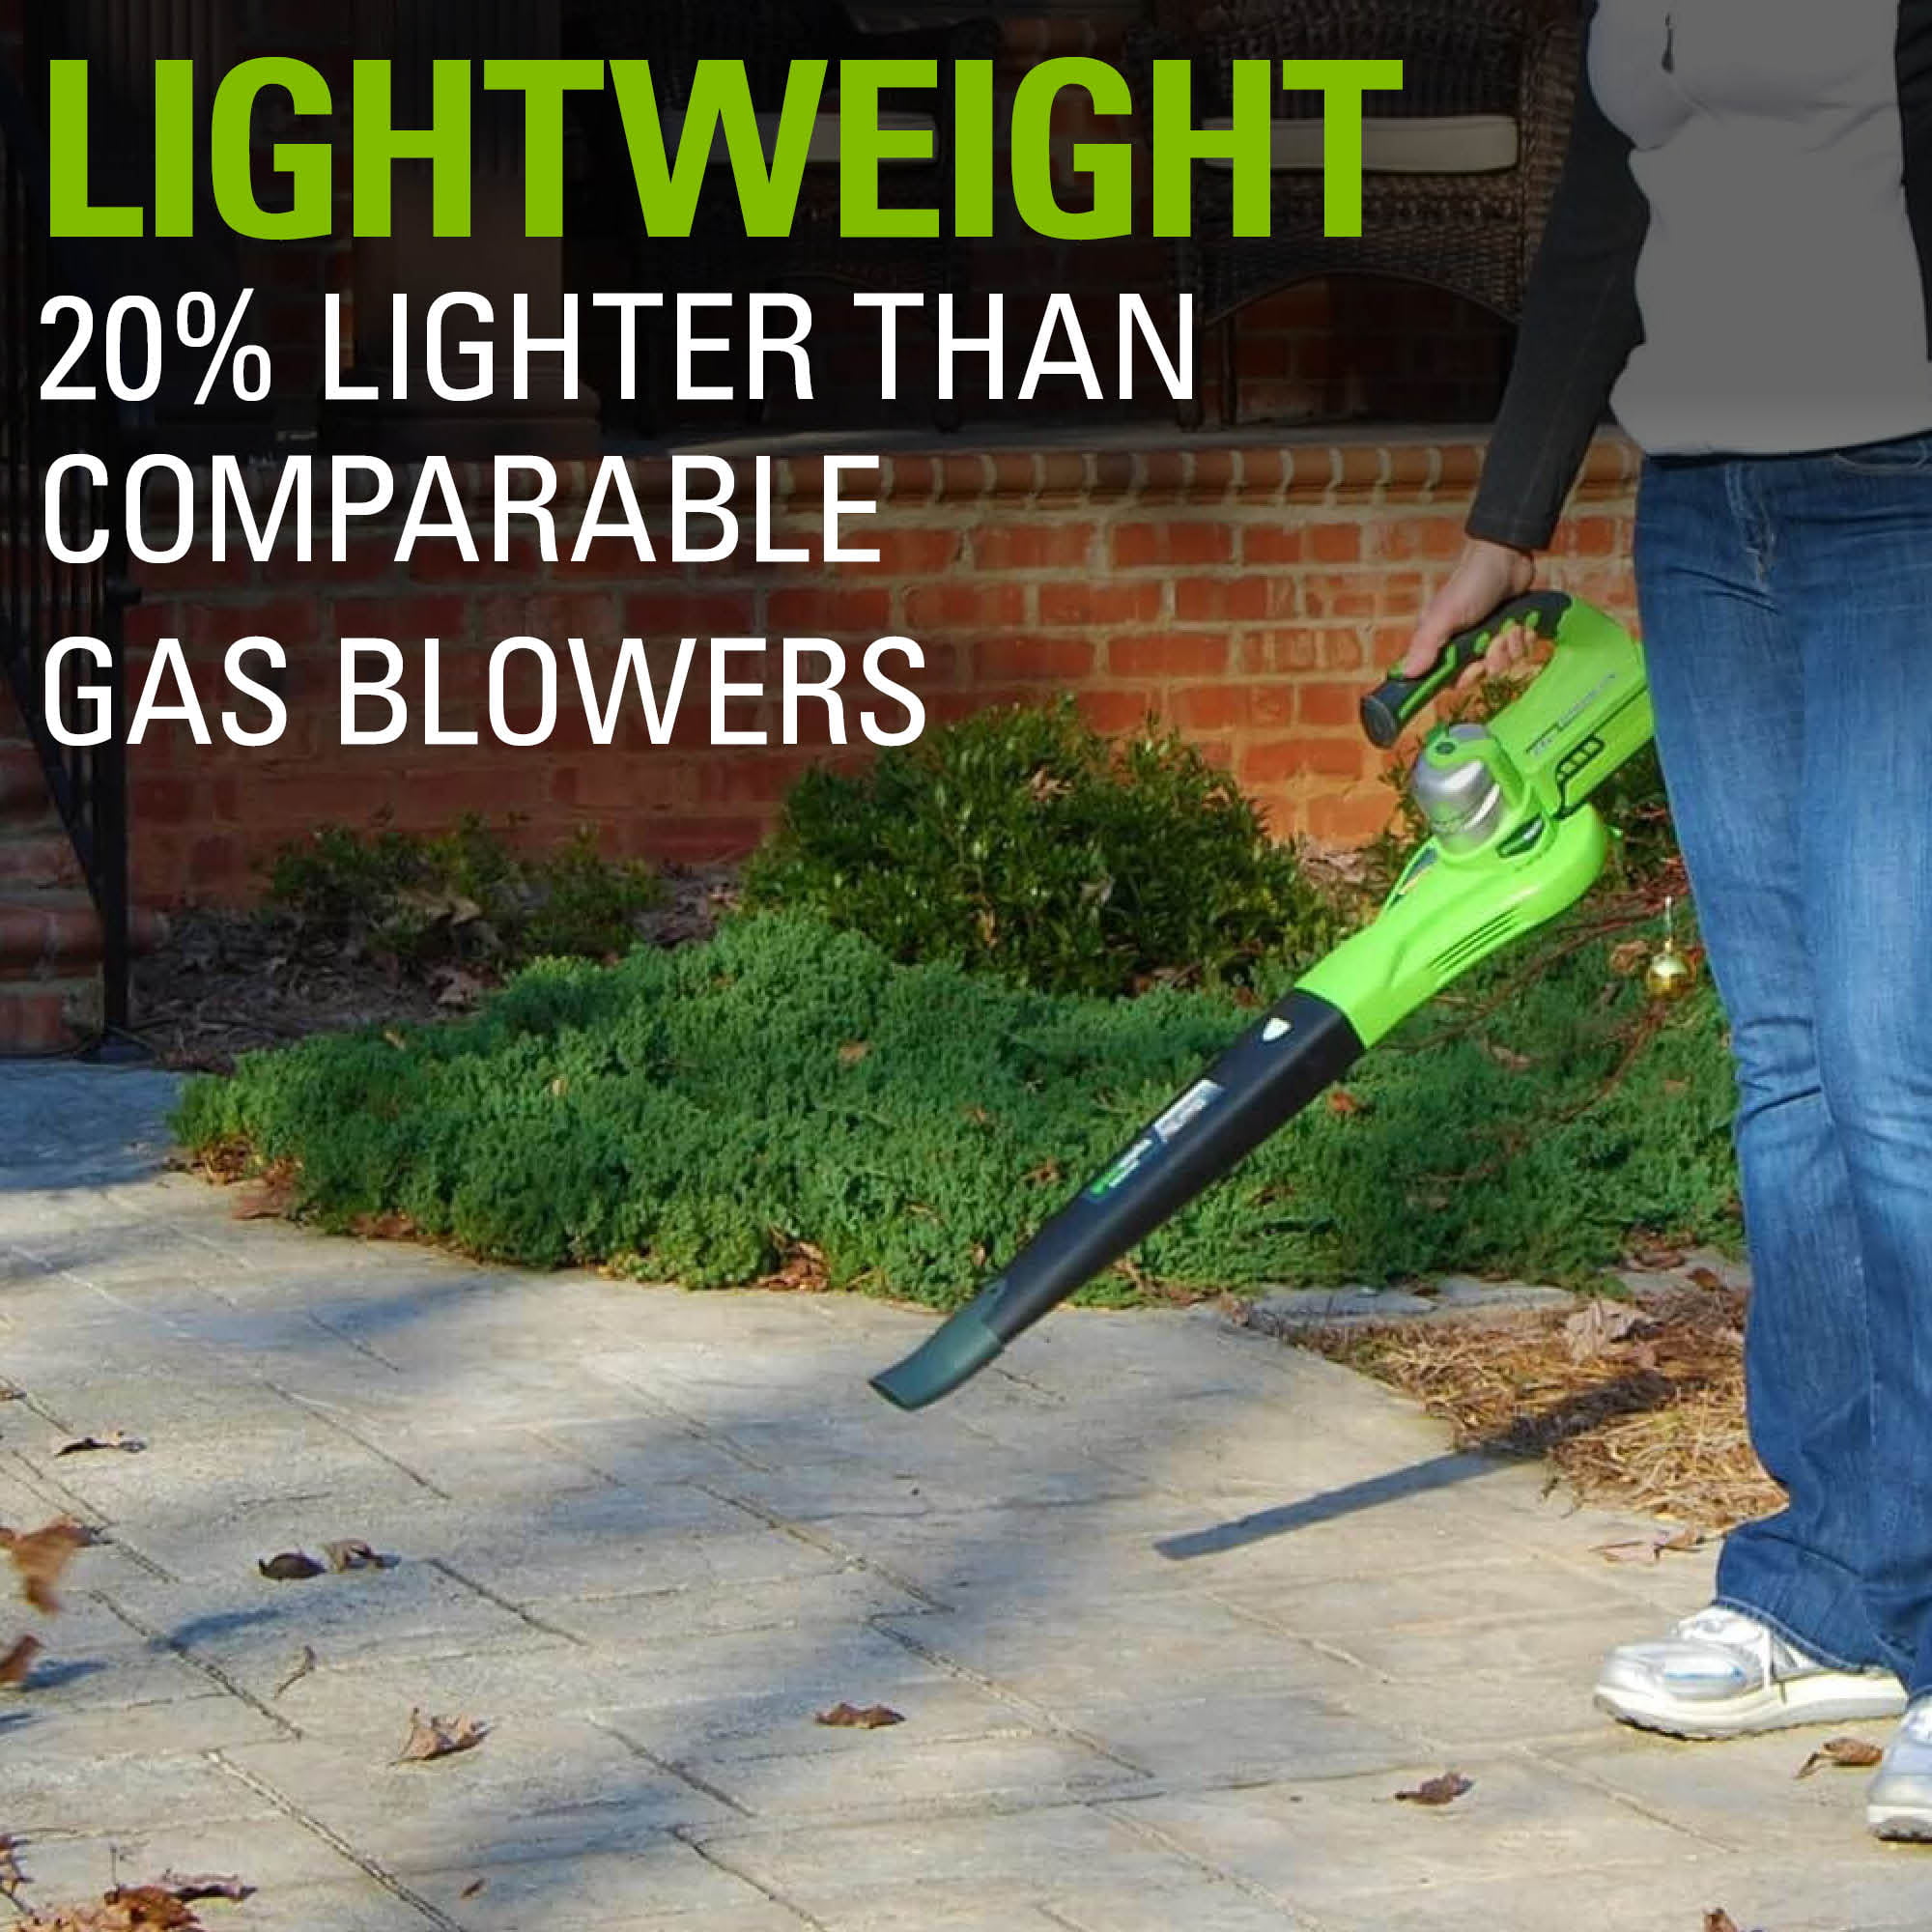 24V Cordless Leaf Blower with 2* 4.0 Ah Batteries & Blow Tubes, Up to –  Tingmengte